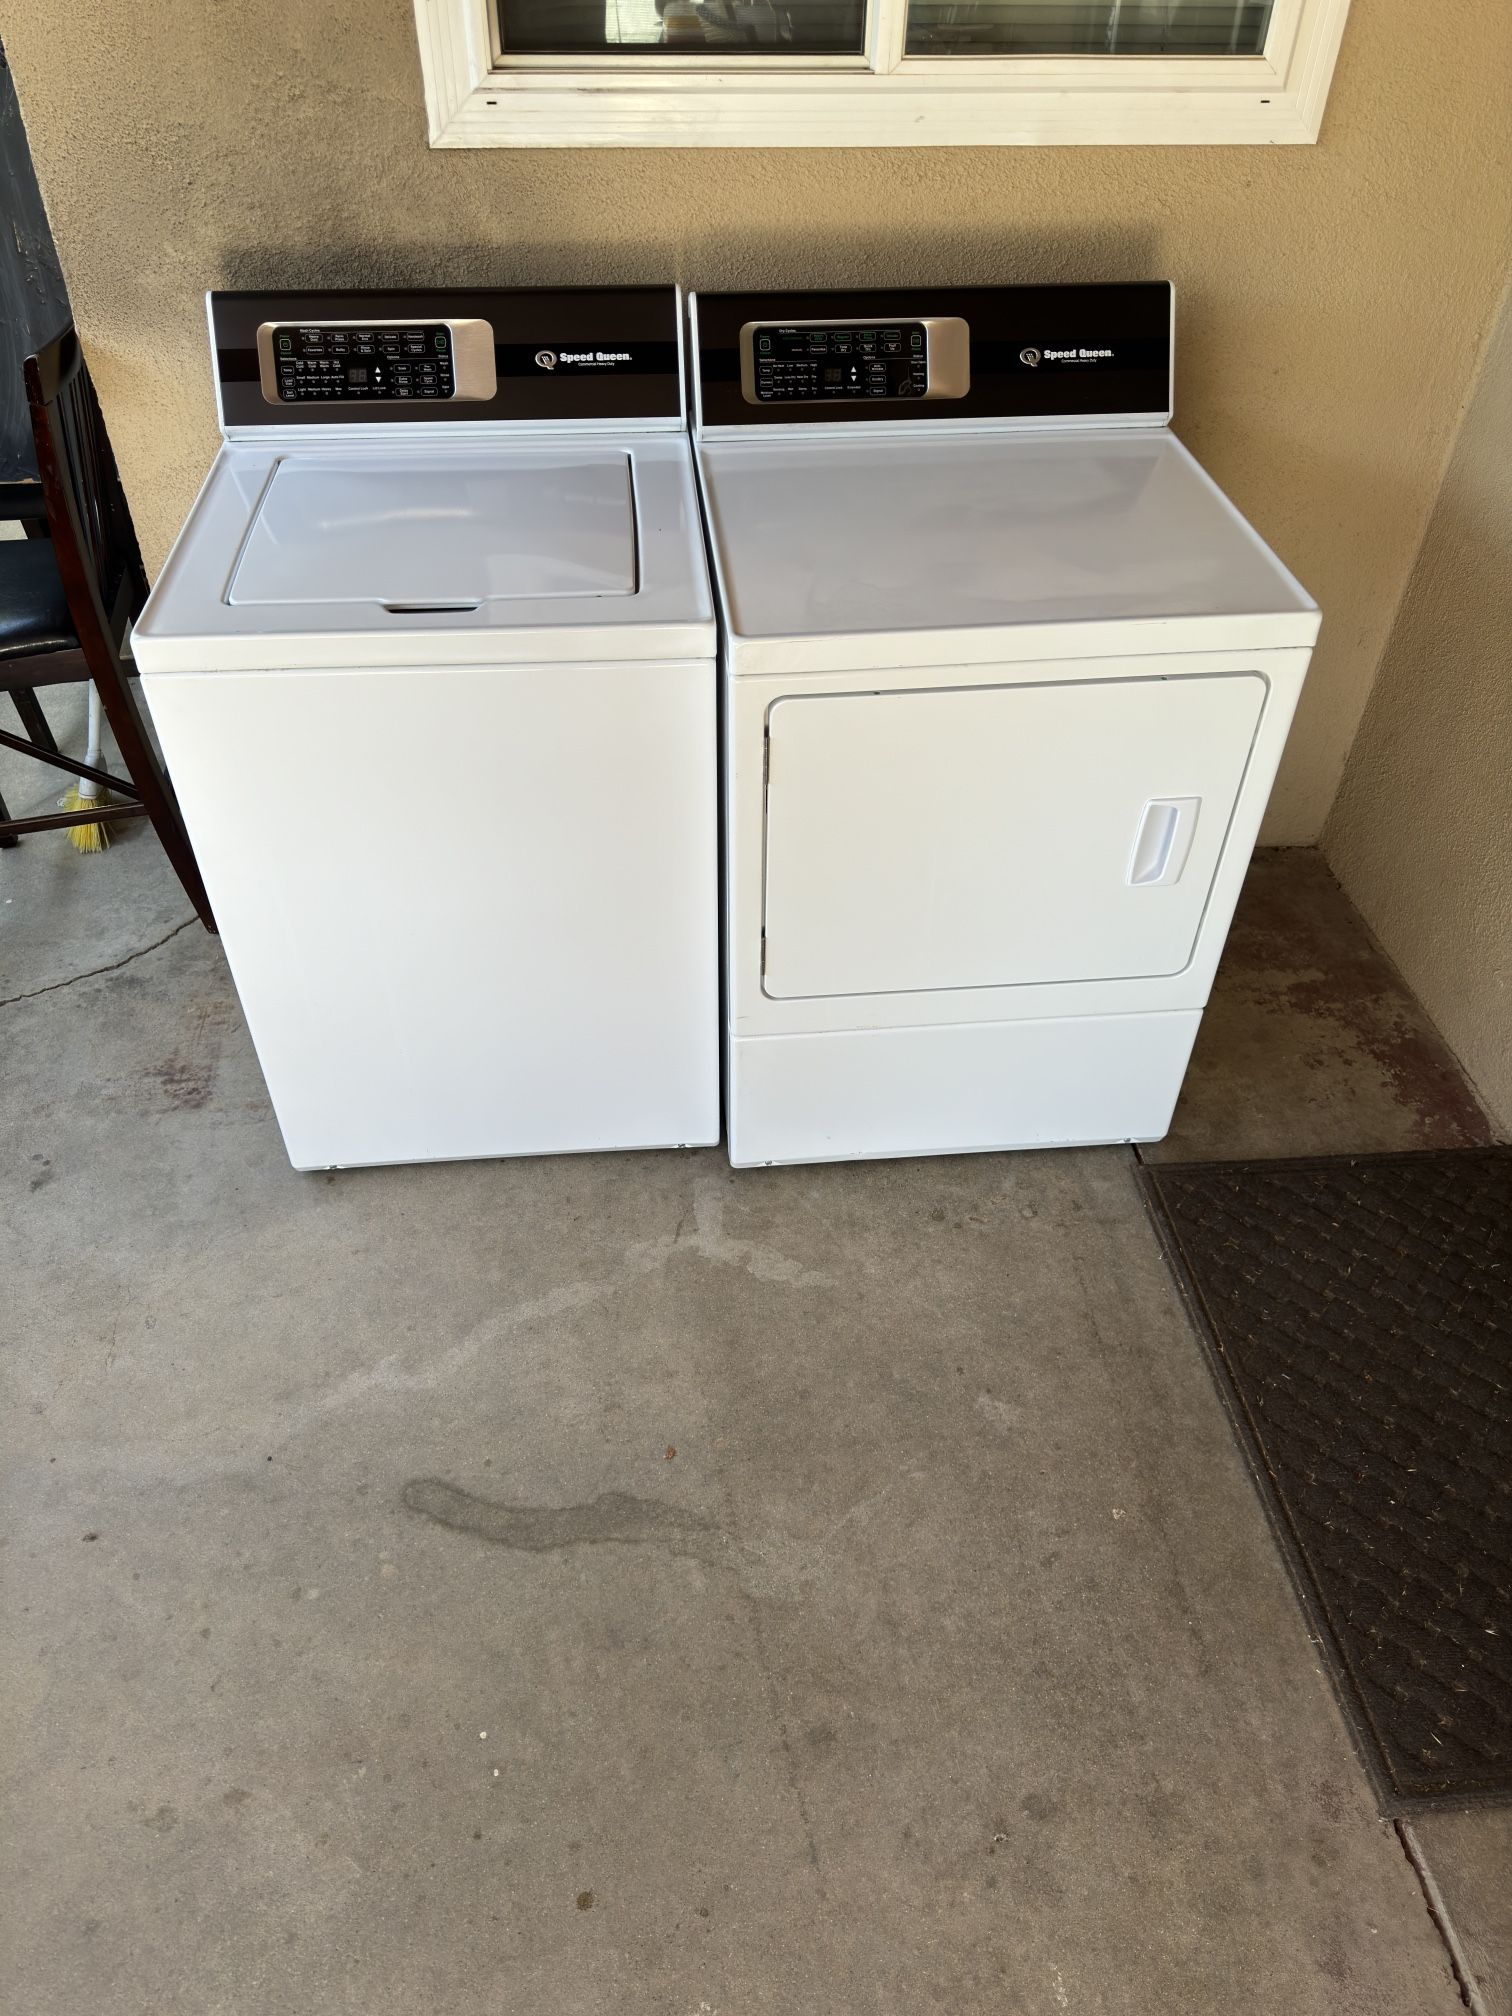 SPEED QUEEN COMMERCIAL HEAVY DUTY WASHER AND GAS DRYER SET